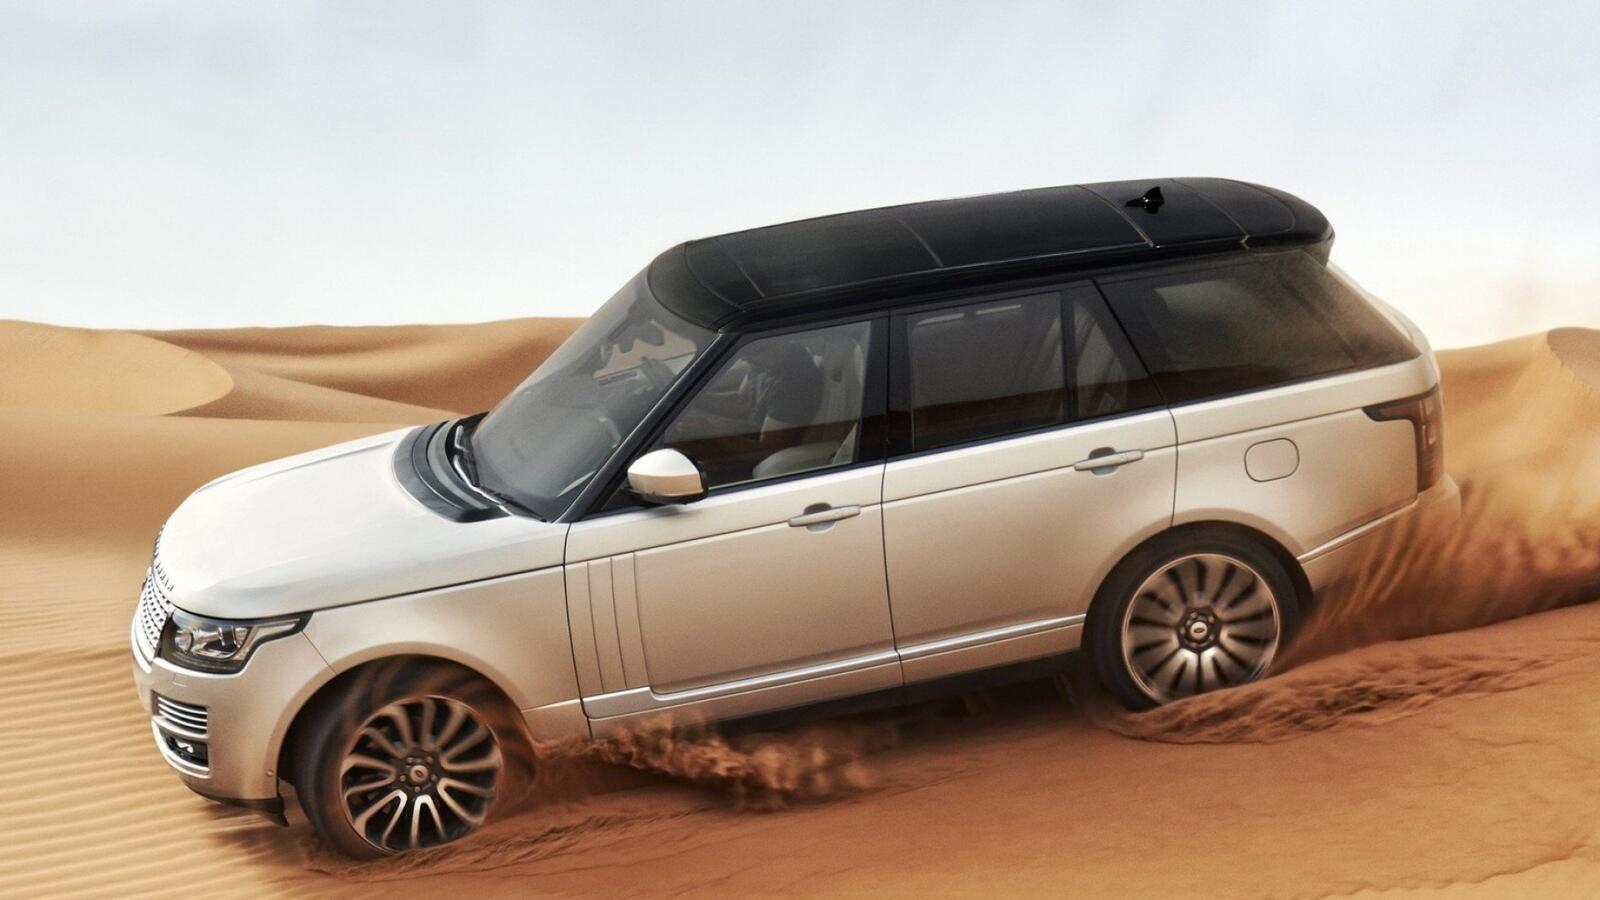 Wallpapers Land Rover cars sand on the desktop